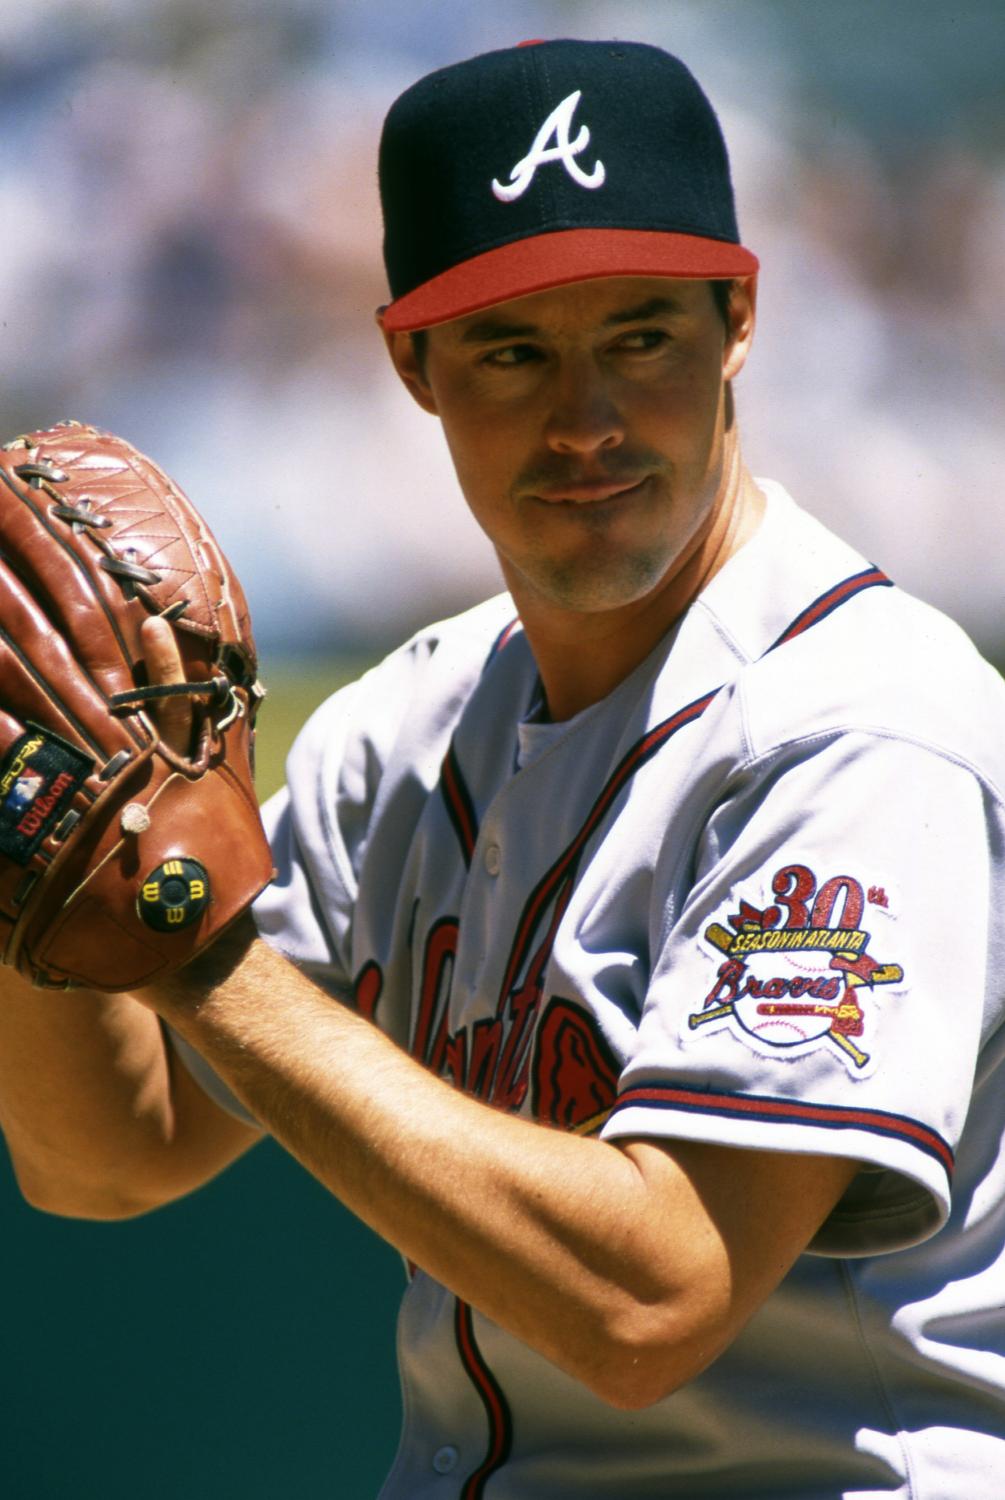 Maddux's drive powered him to 300th win | Baseball Hall of Fame